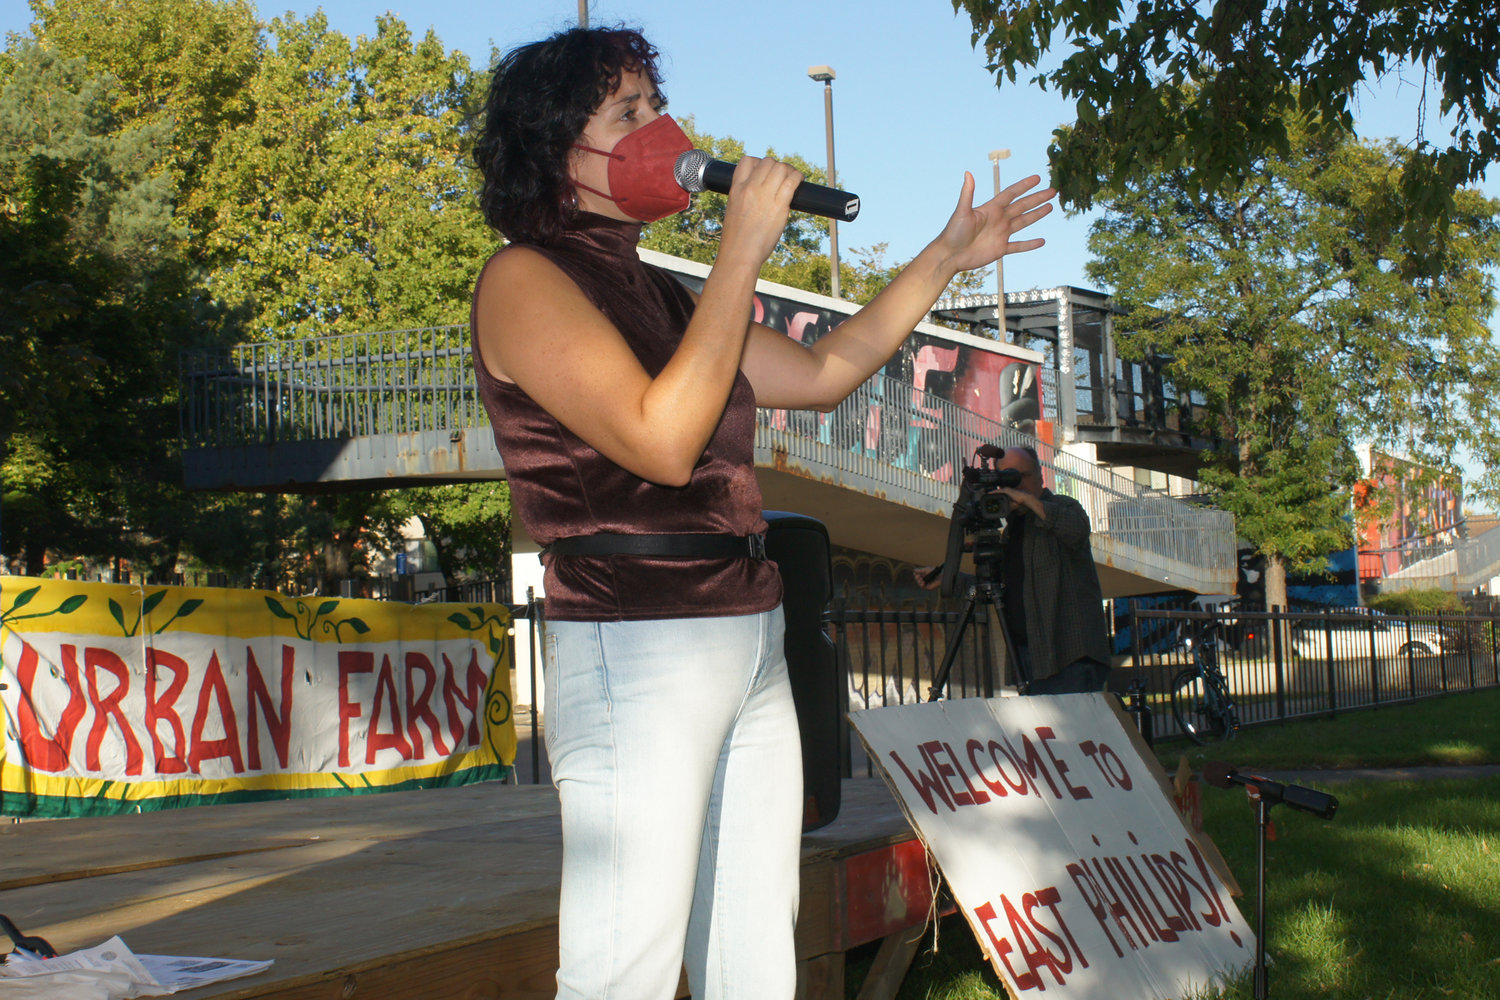 Ward 9 council member Alondro Cono speaks to the crowd of her own neighborhoods and constituents.